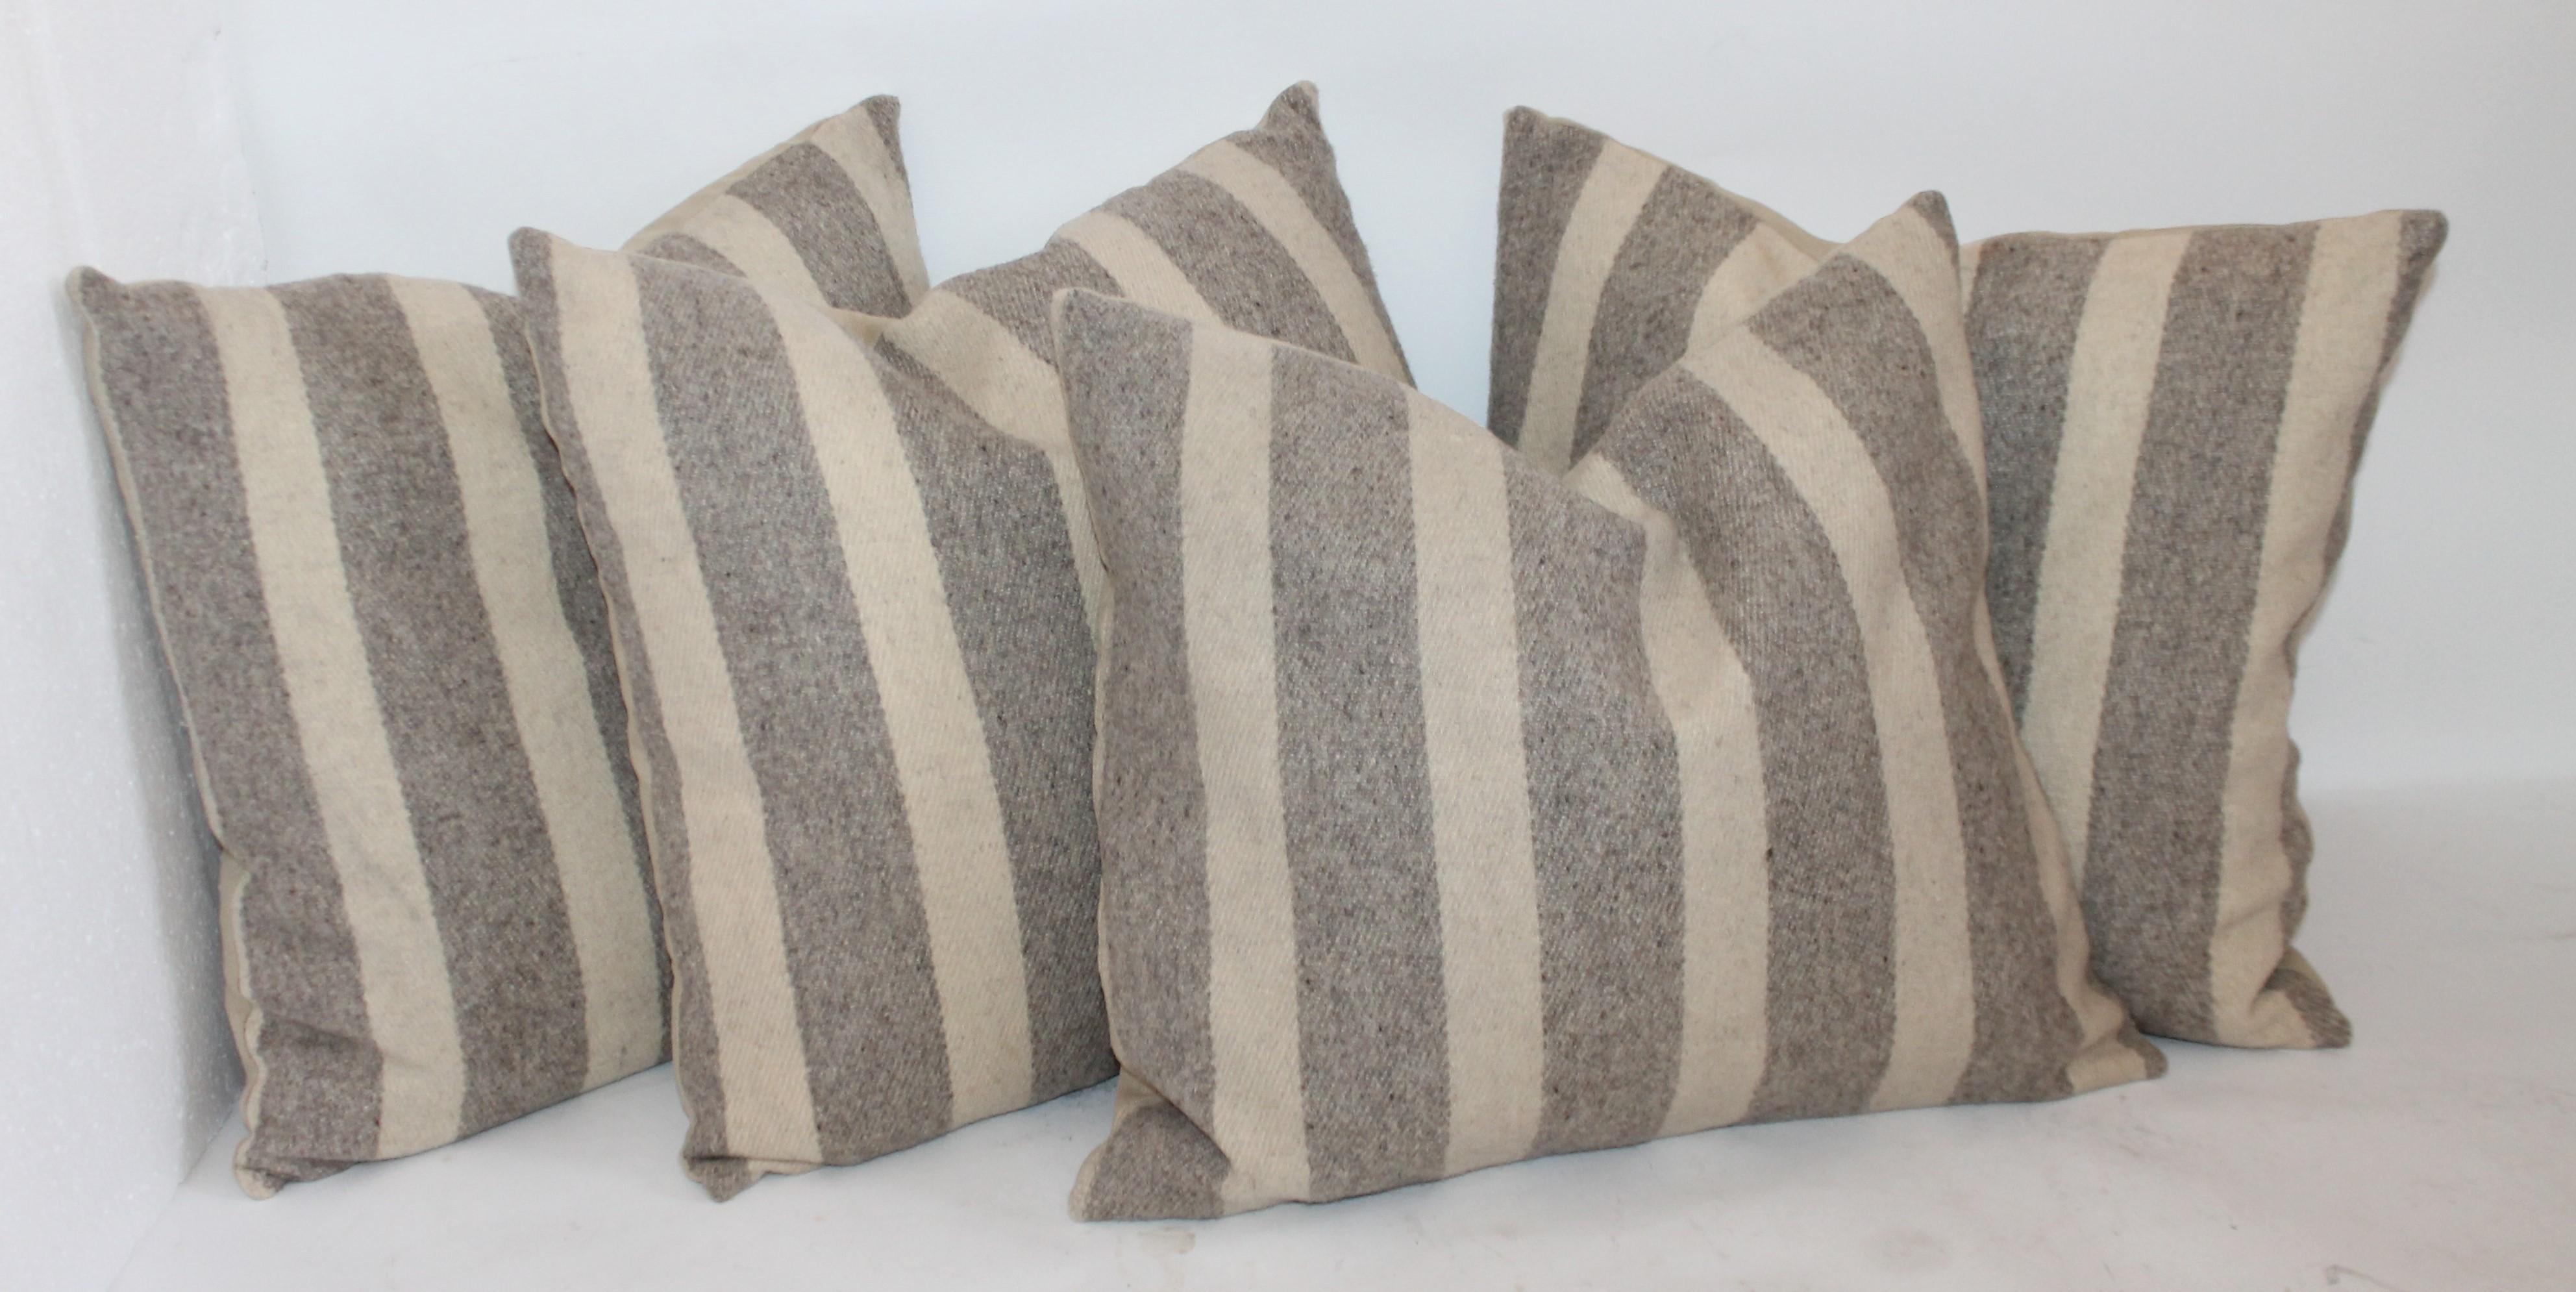 Adirondack Collection of Wool Plaid Pillows, Six Pillows Total